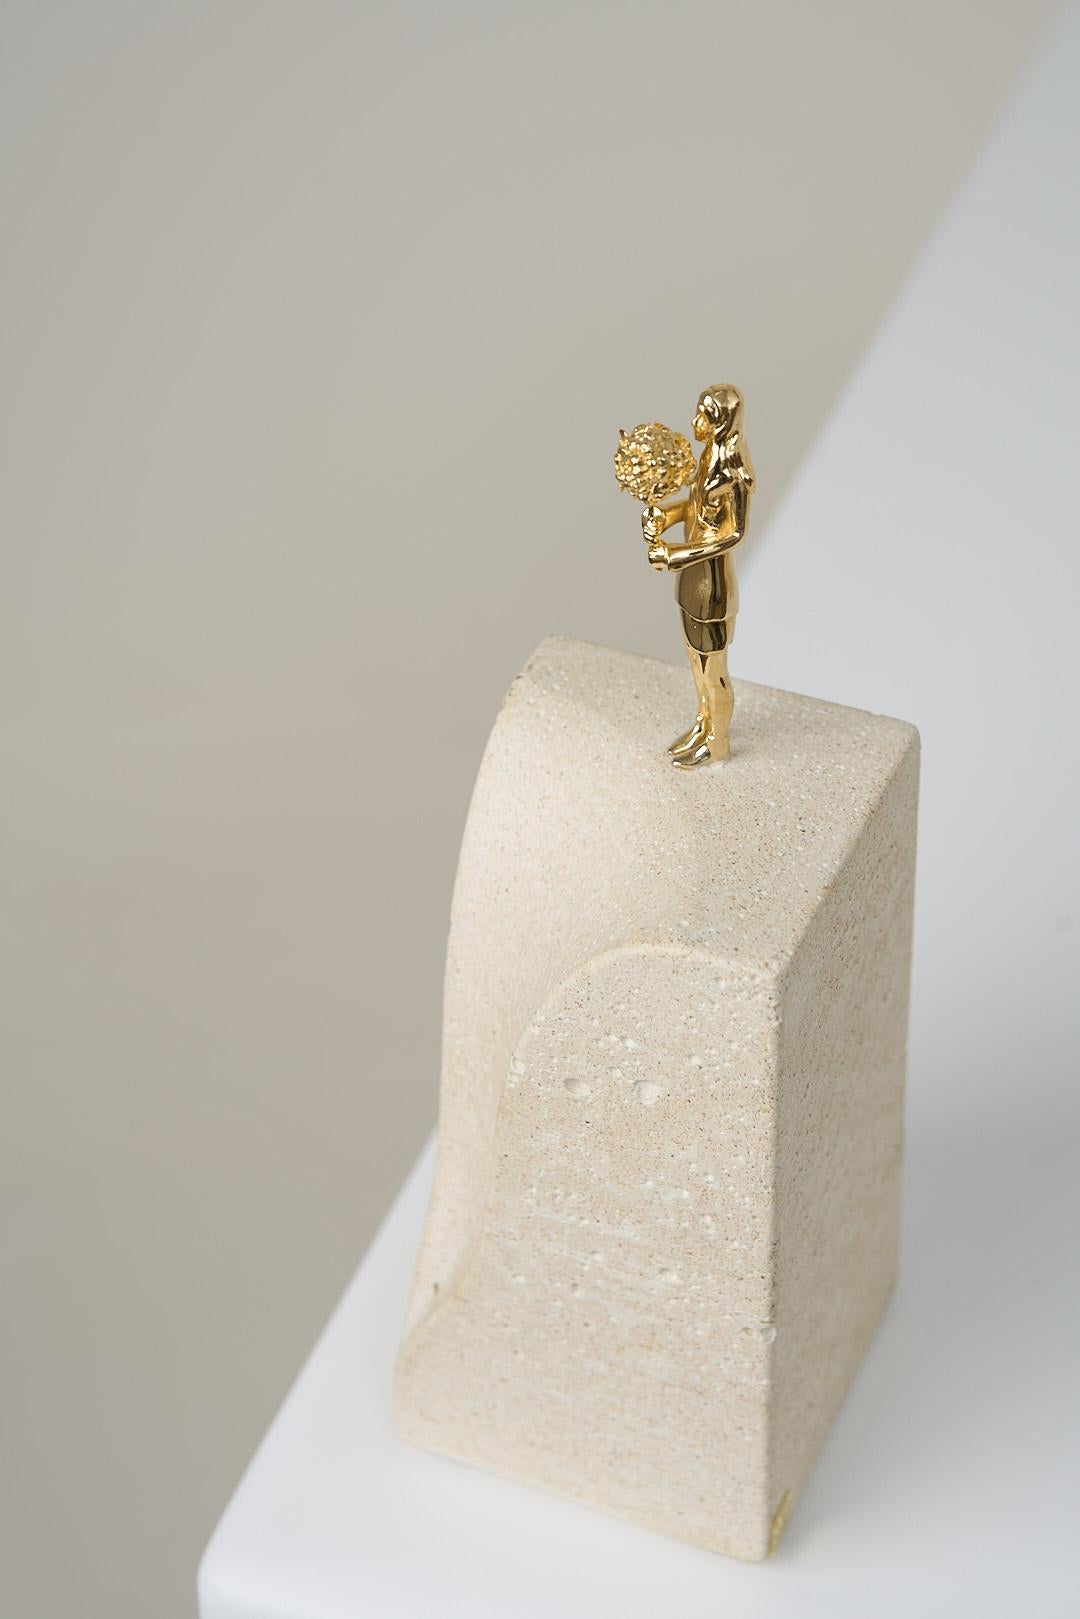 Sinestesia Series, Concrete and Brass Girl Sculpture N3 For Sale 4